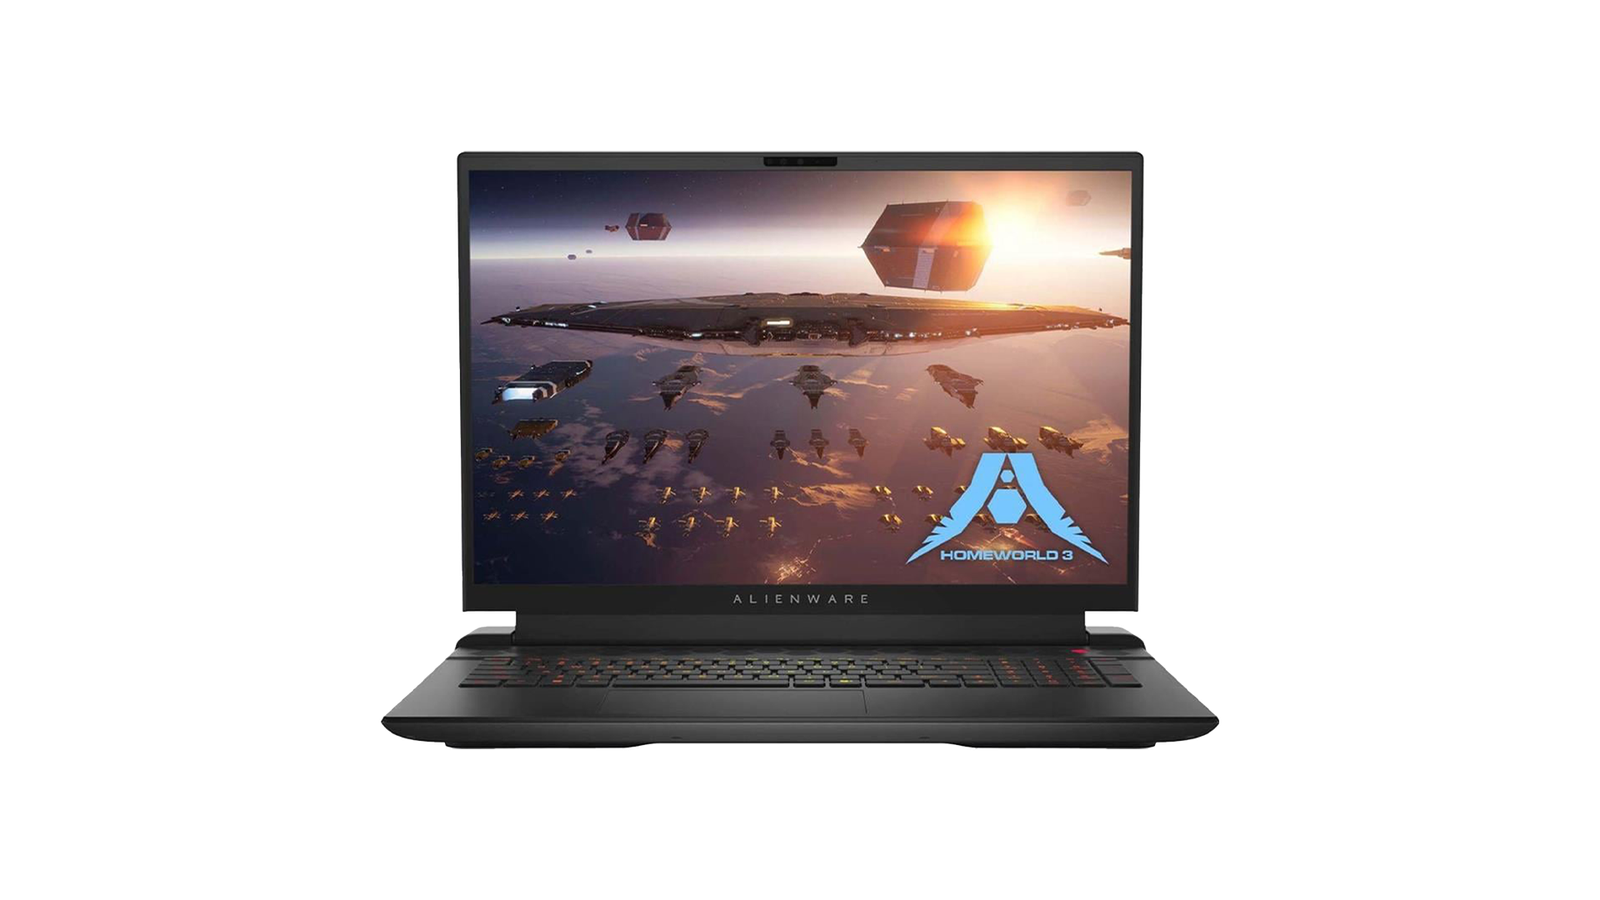 Alienware M18 - Most Powerful Gaming Laptop